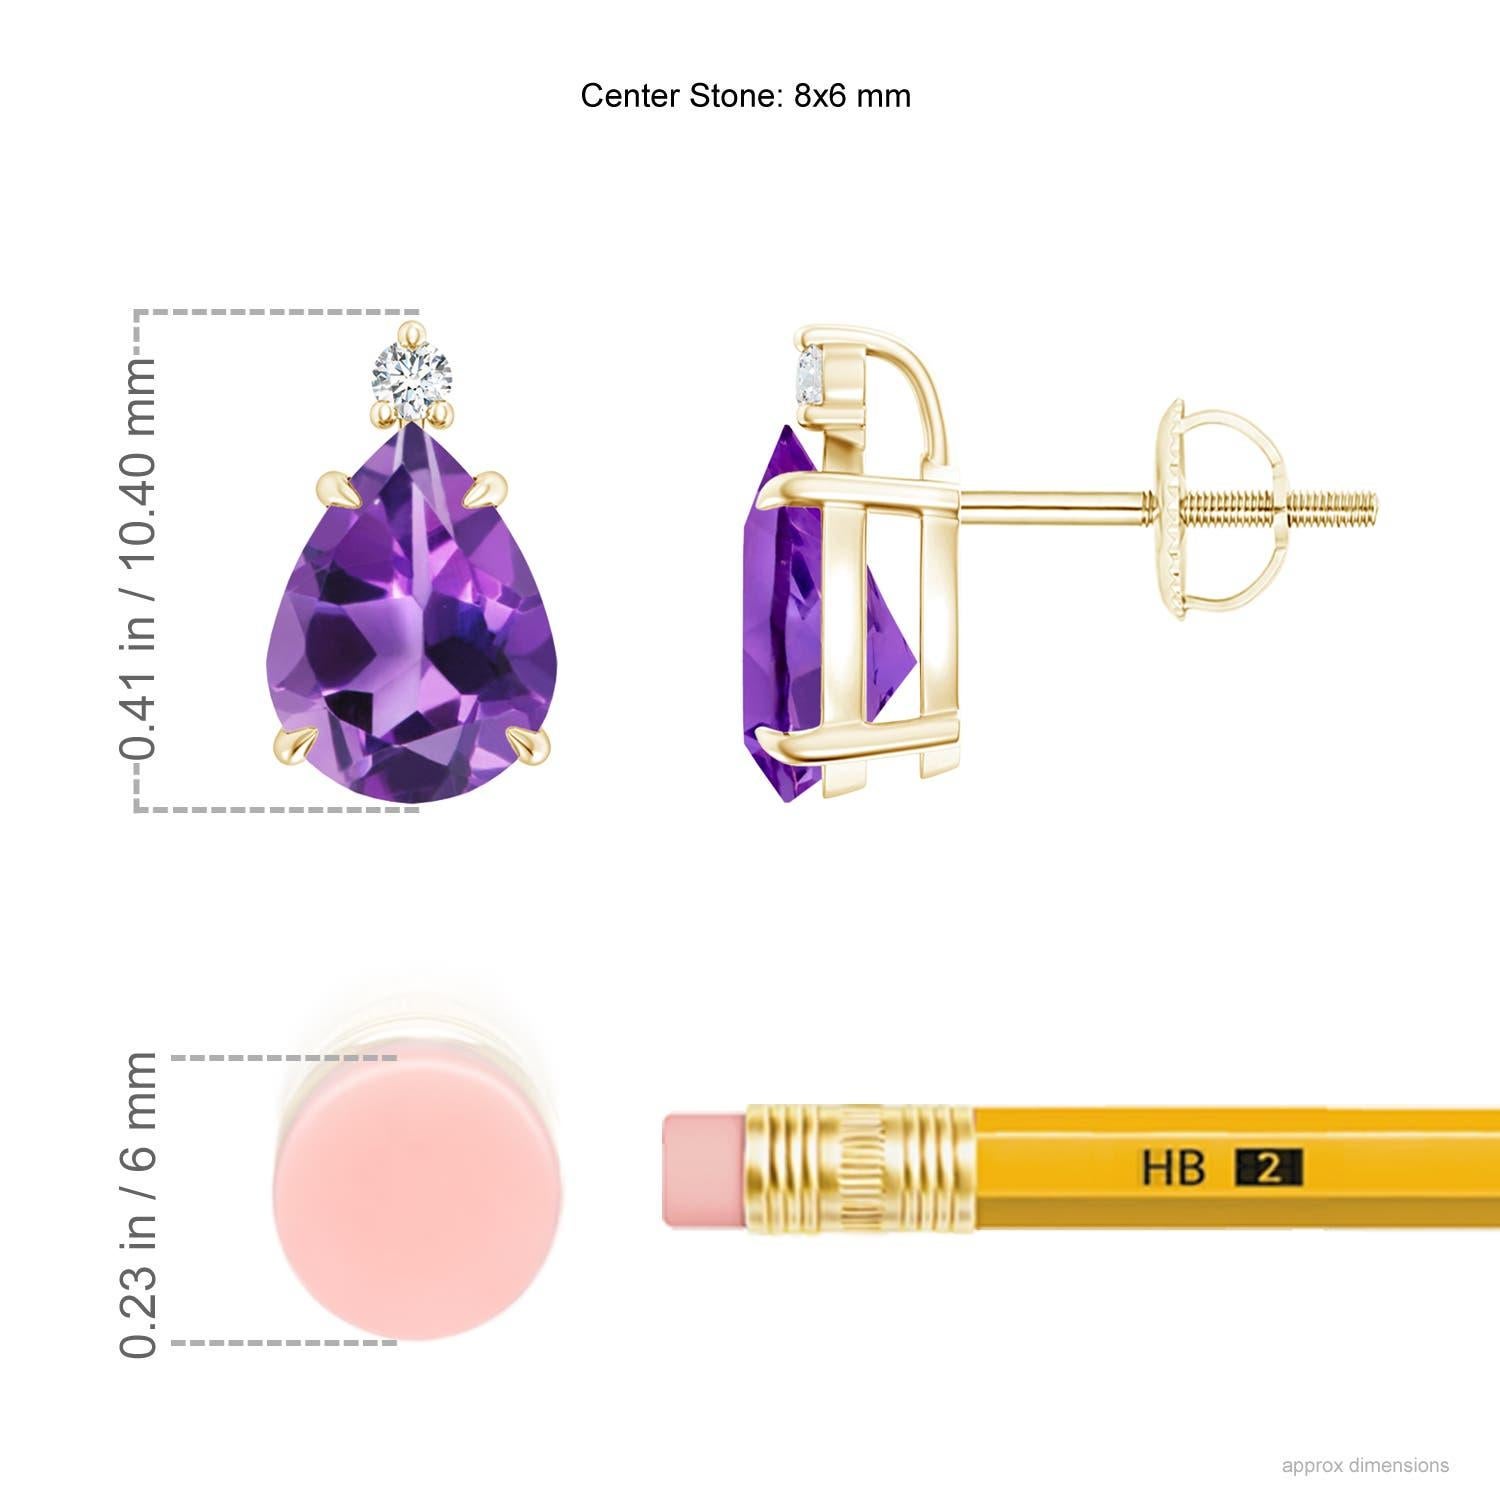 Inverted pear-shaped amethysts, secured in claw settings, exude a striking deep purple hue. The brilliant round diamond at the tip lends added sparkle to these 14k yellow gold solitaire amethyst earrings.